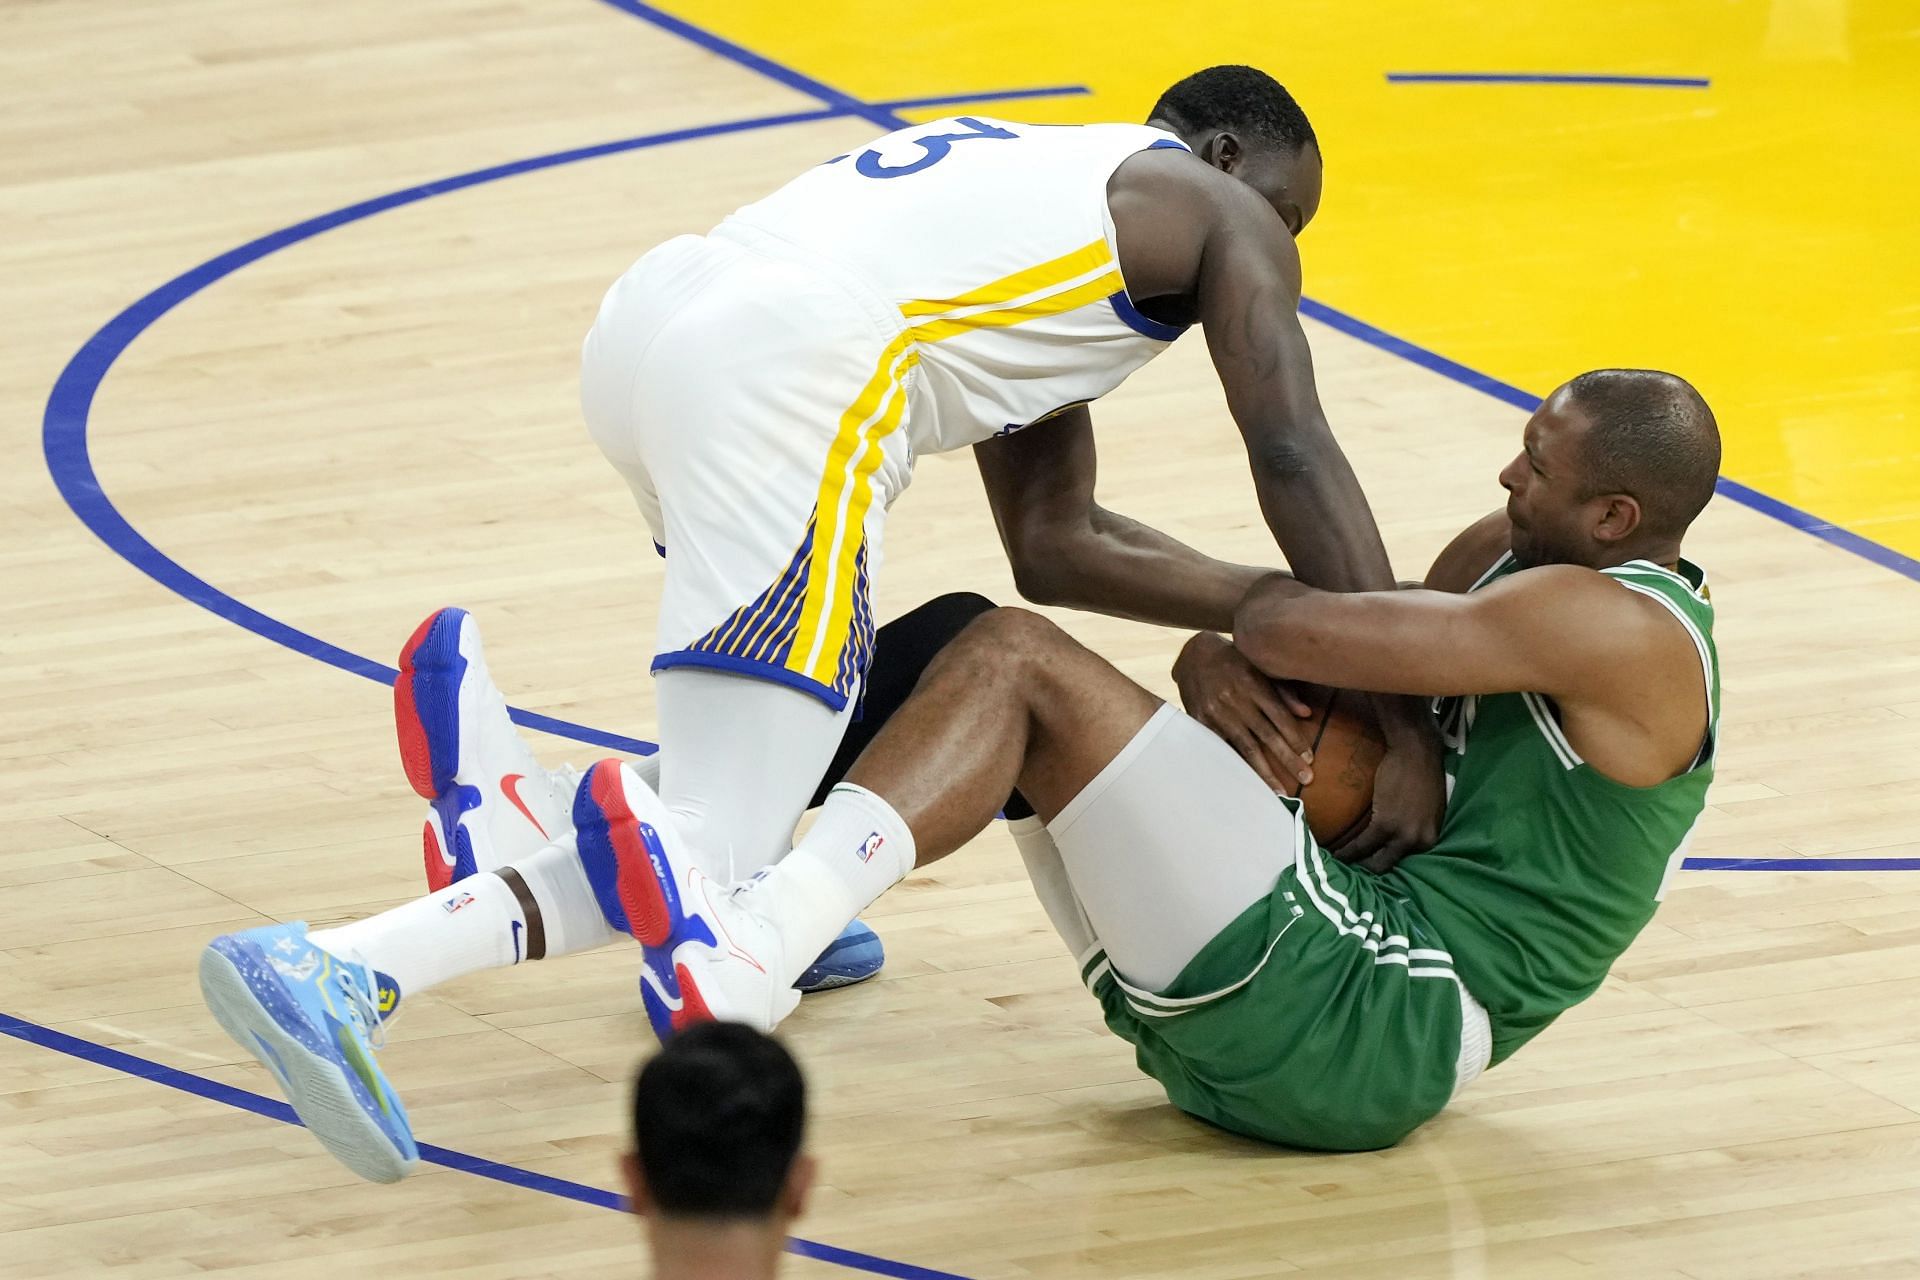 Green wrestles for the ball against Al Horford in the 2022 NBA Finals - Game 2